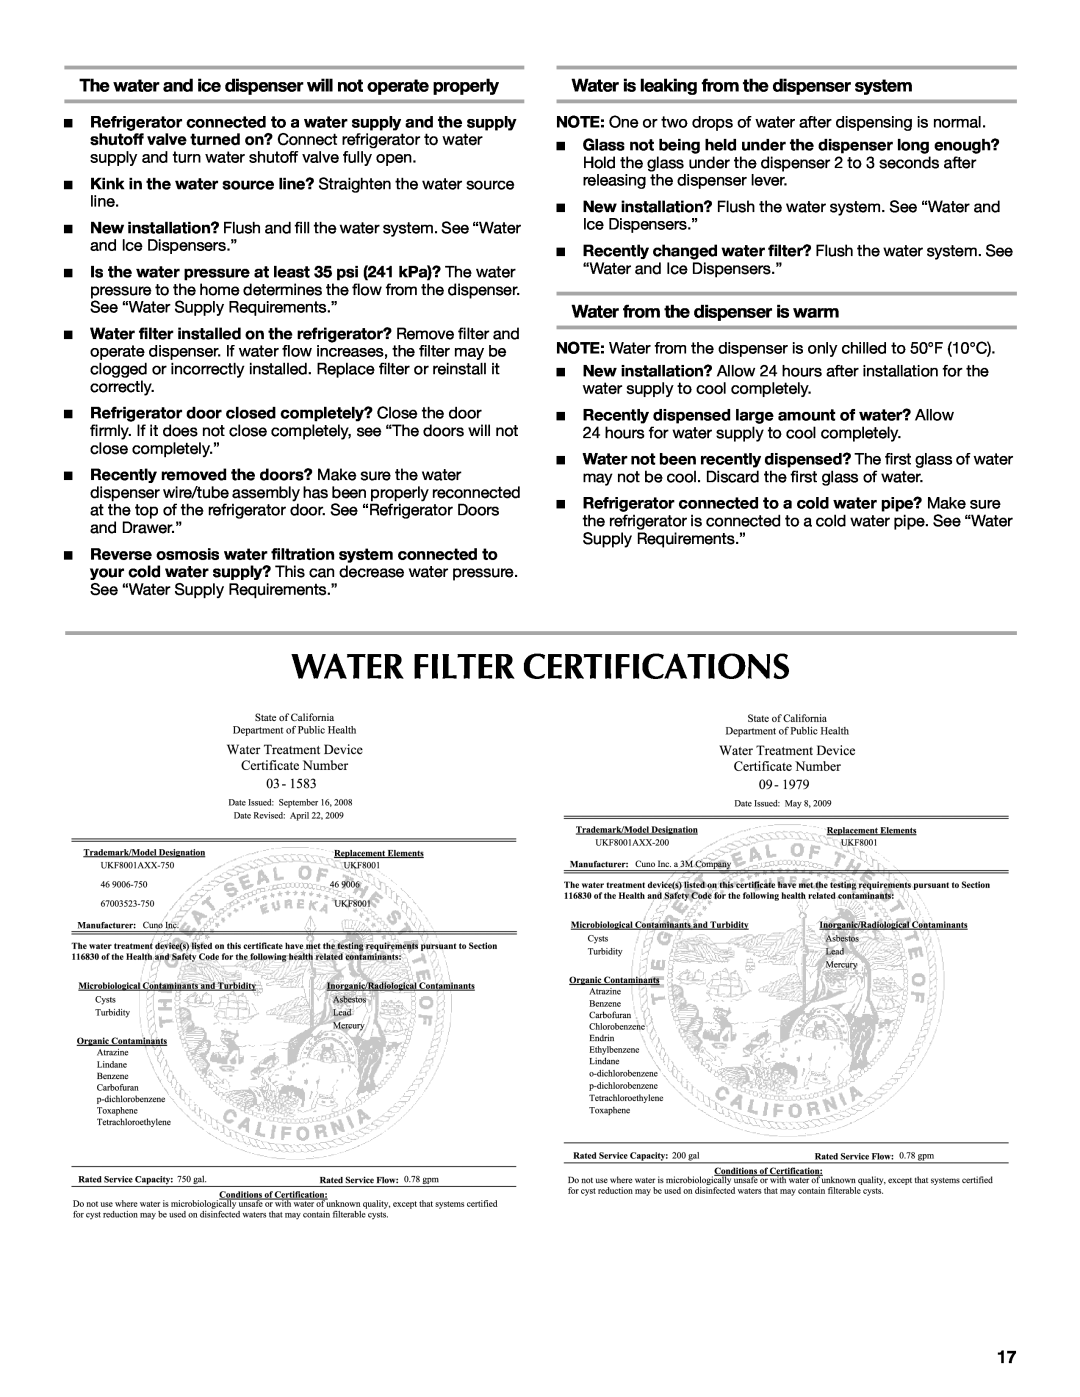 Maytag W10294936A, MFX2571XEW Water Filter Certifications, The water and ice dispenser will not operate properly 